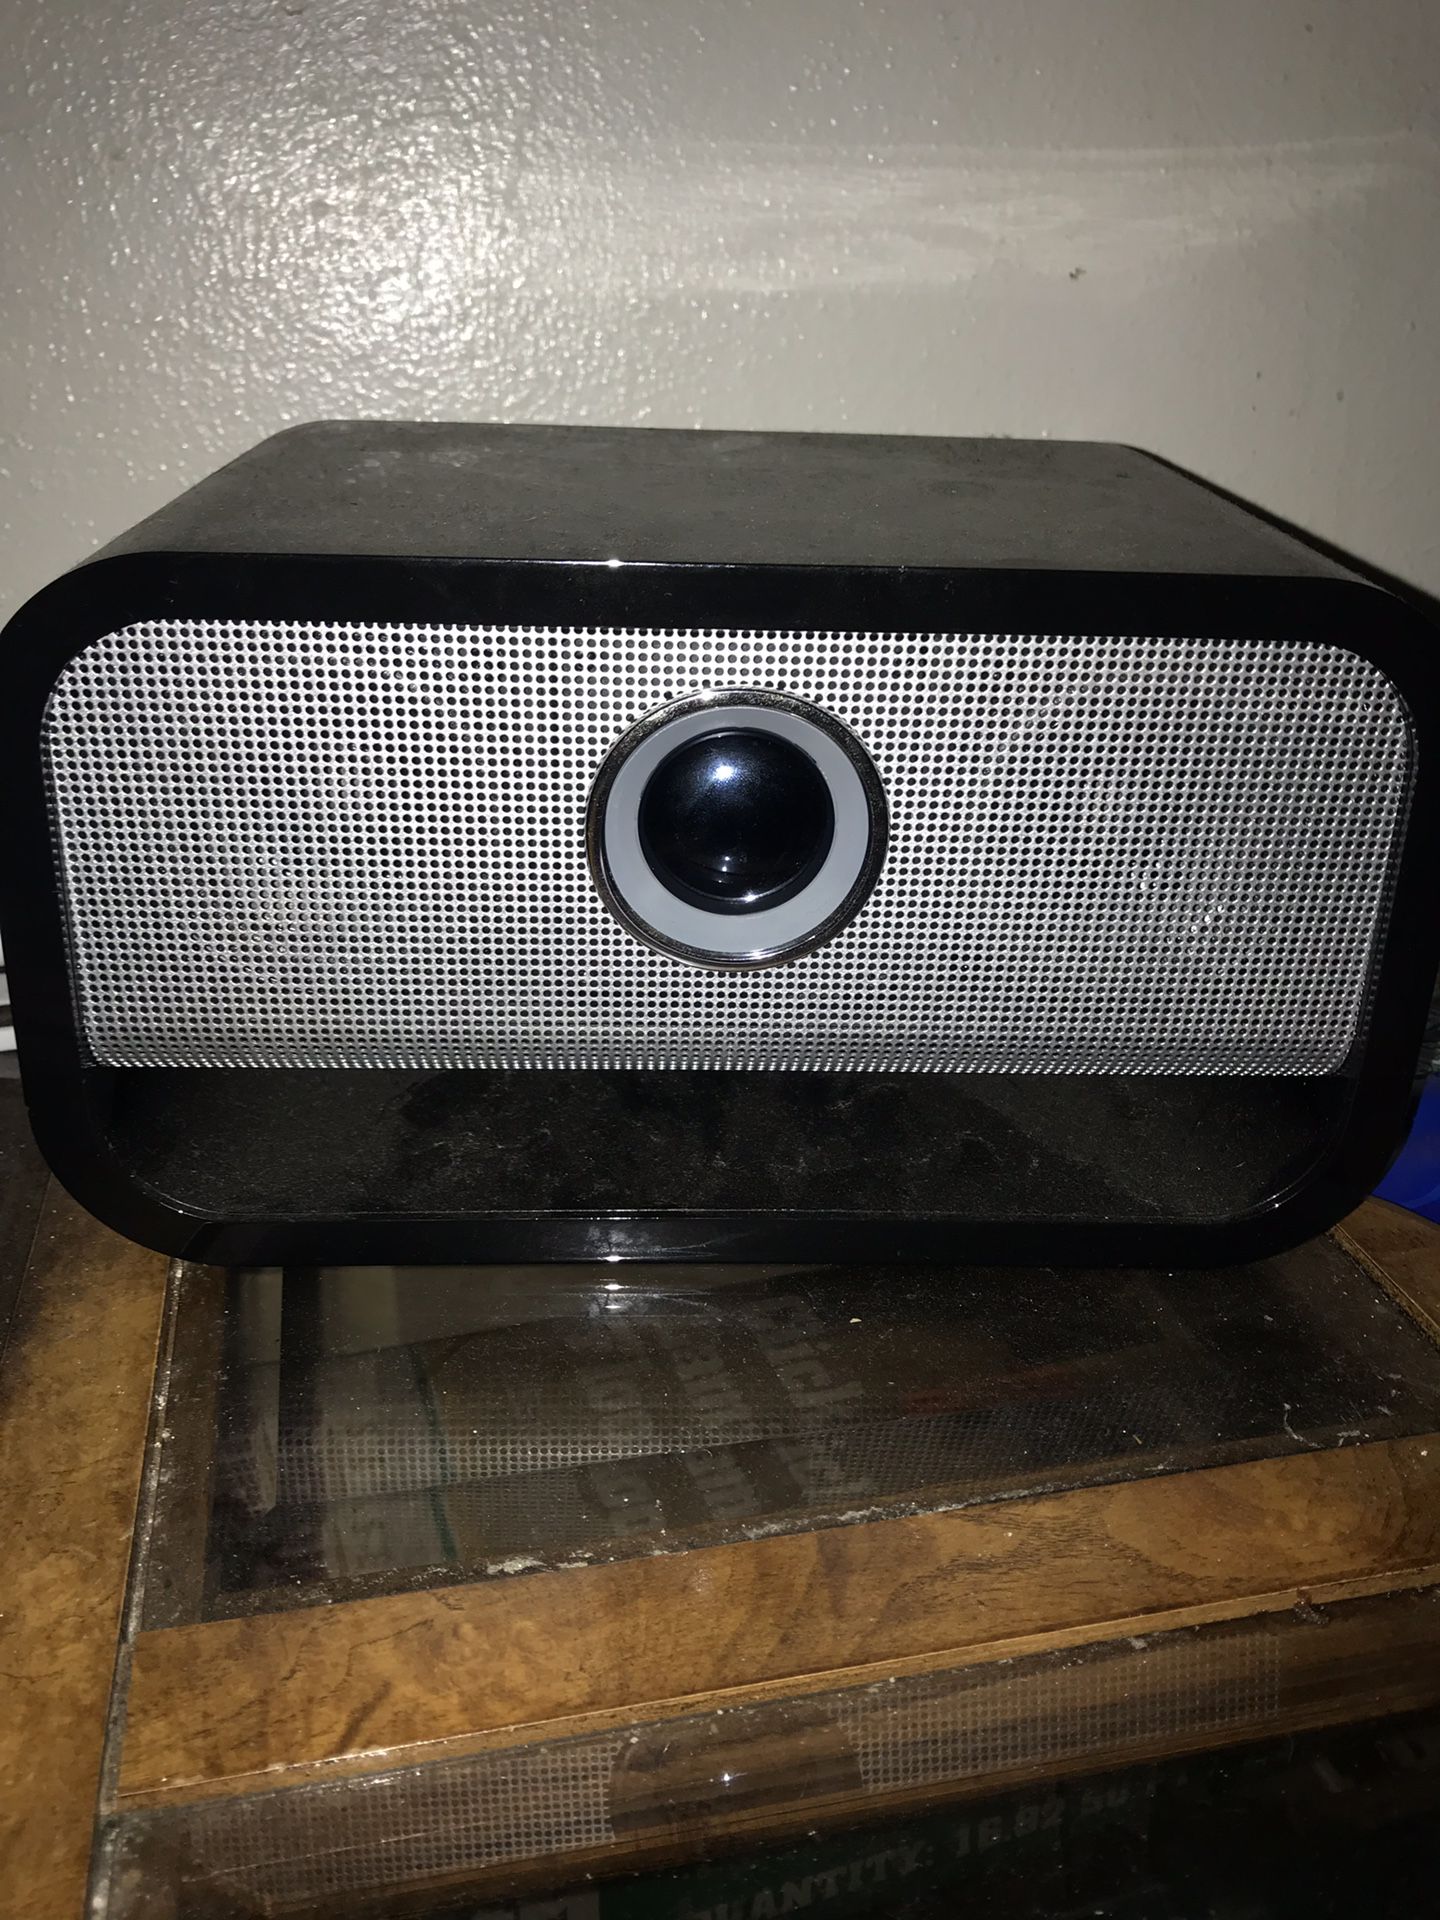 Bluetooth speaker with bass and treble control